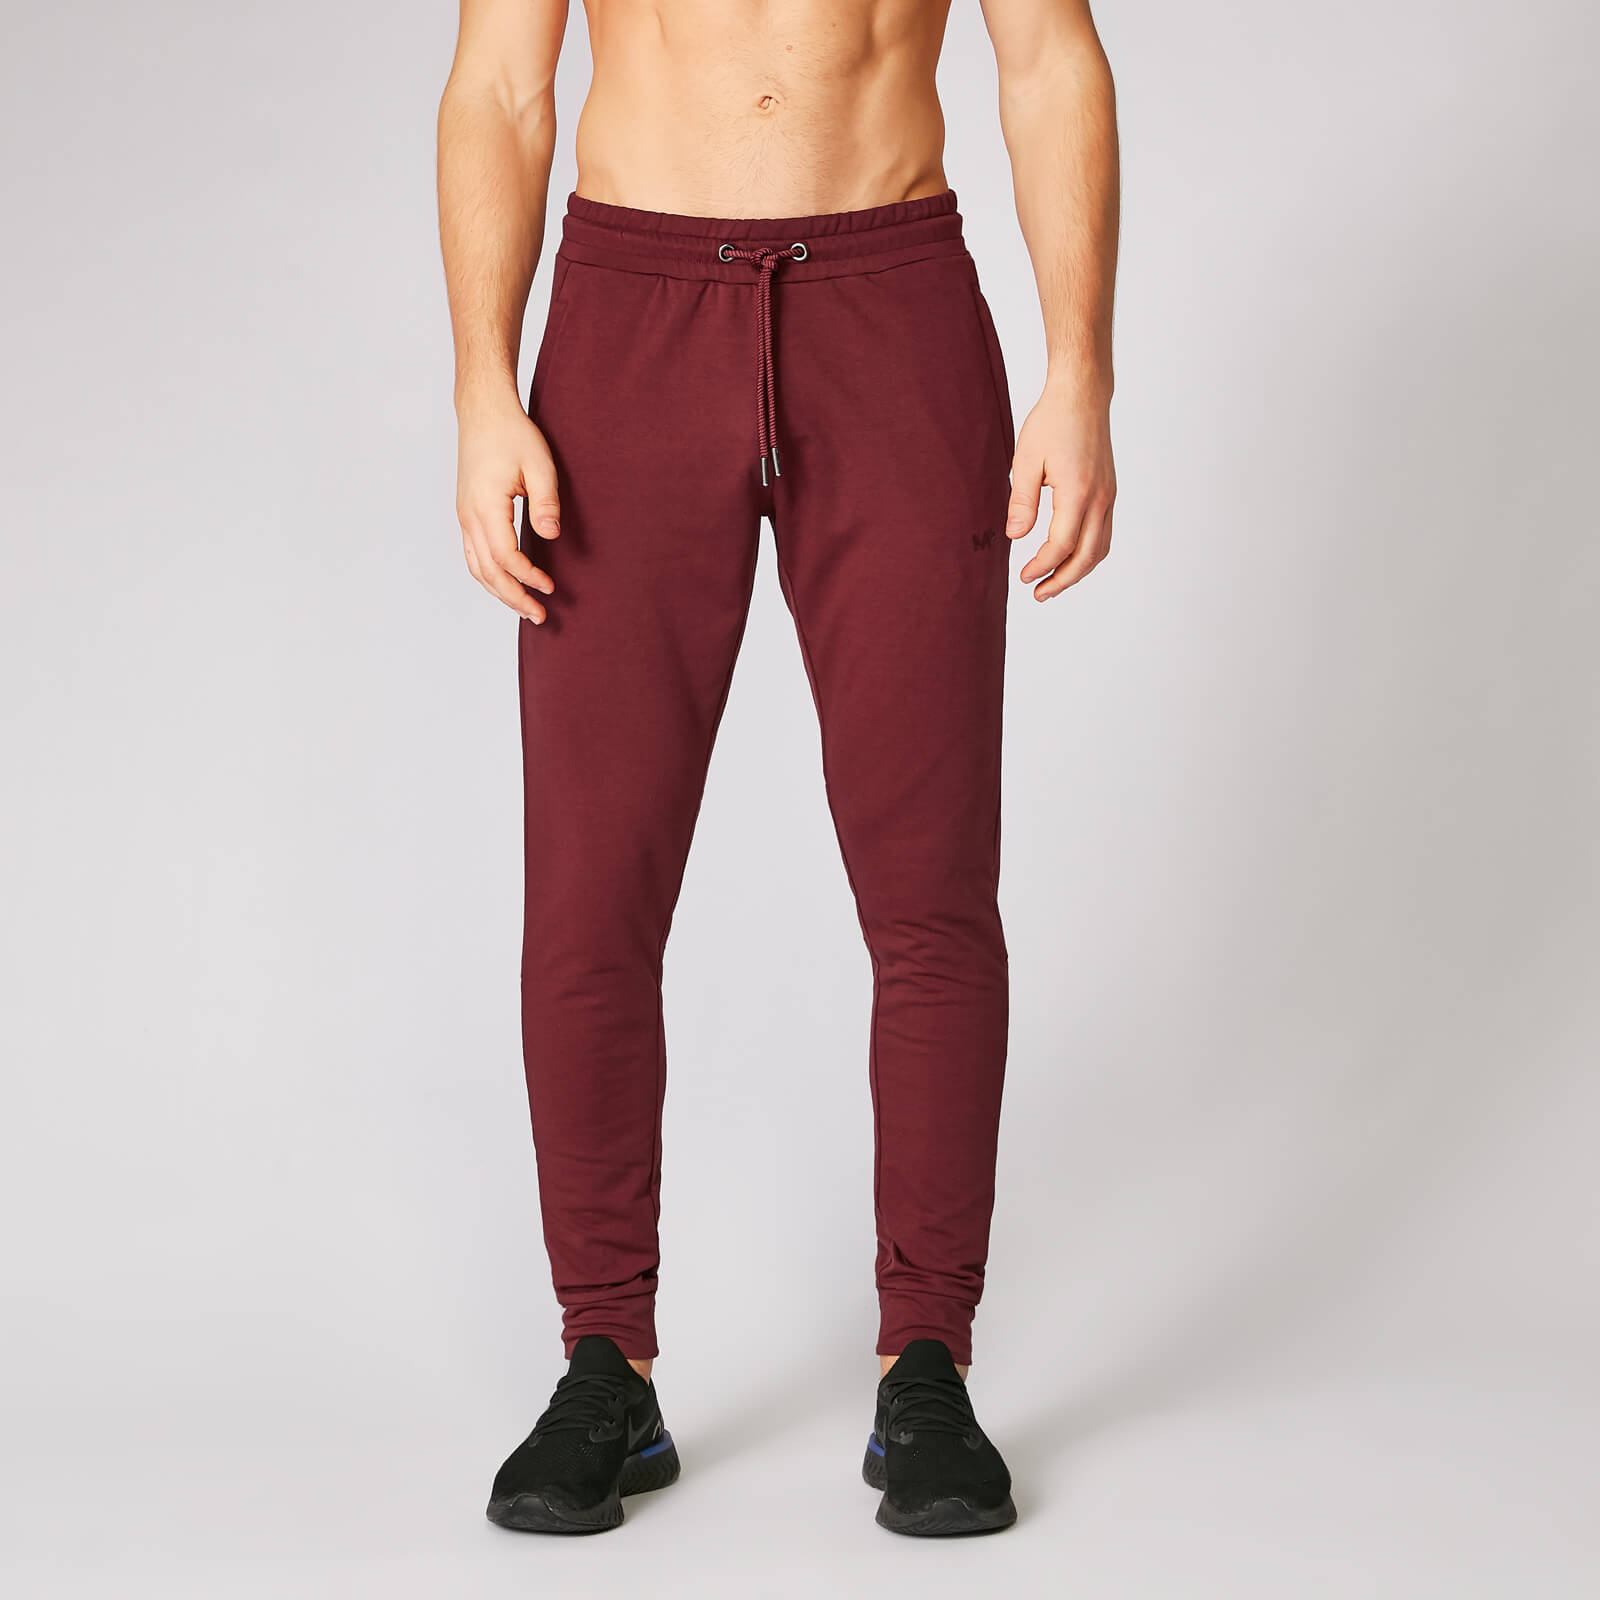 Myprotein Form Slim Fit Joggers - Oxblood - S